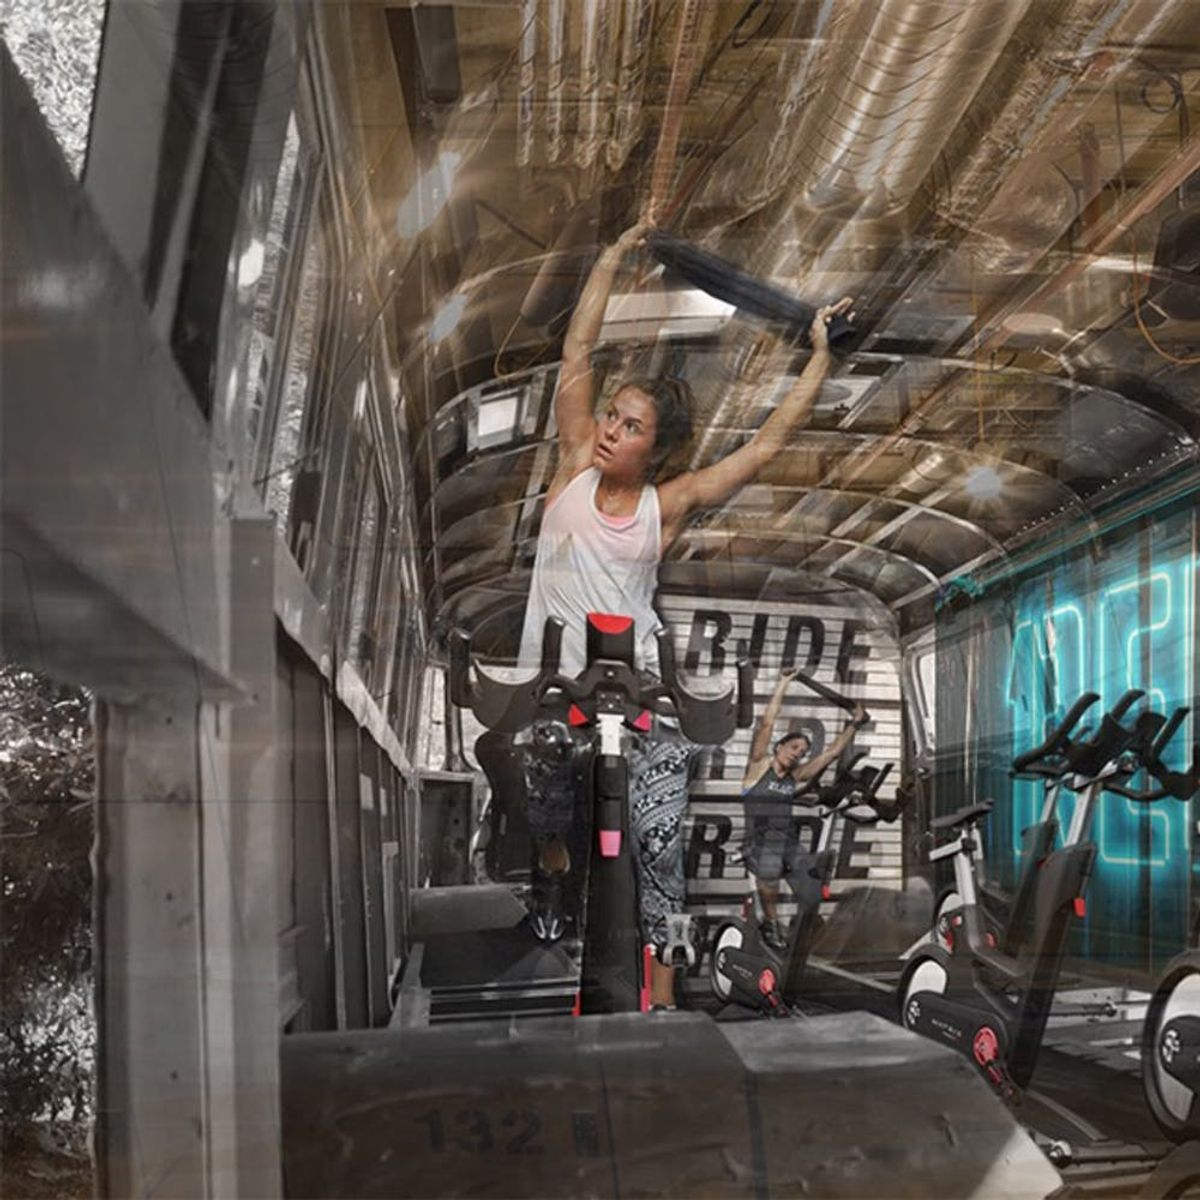 This Bus Wants to Transform Your Daily Commute into a Spin Class